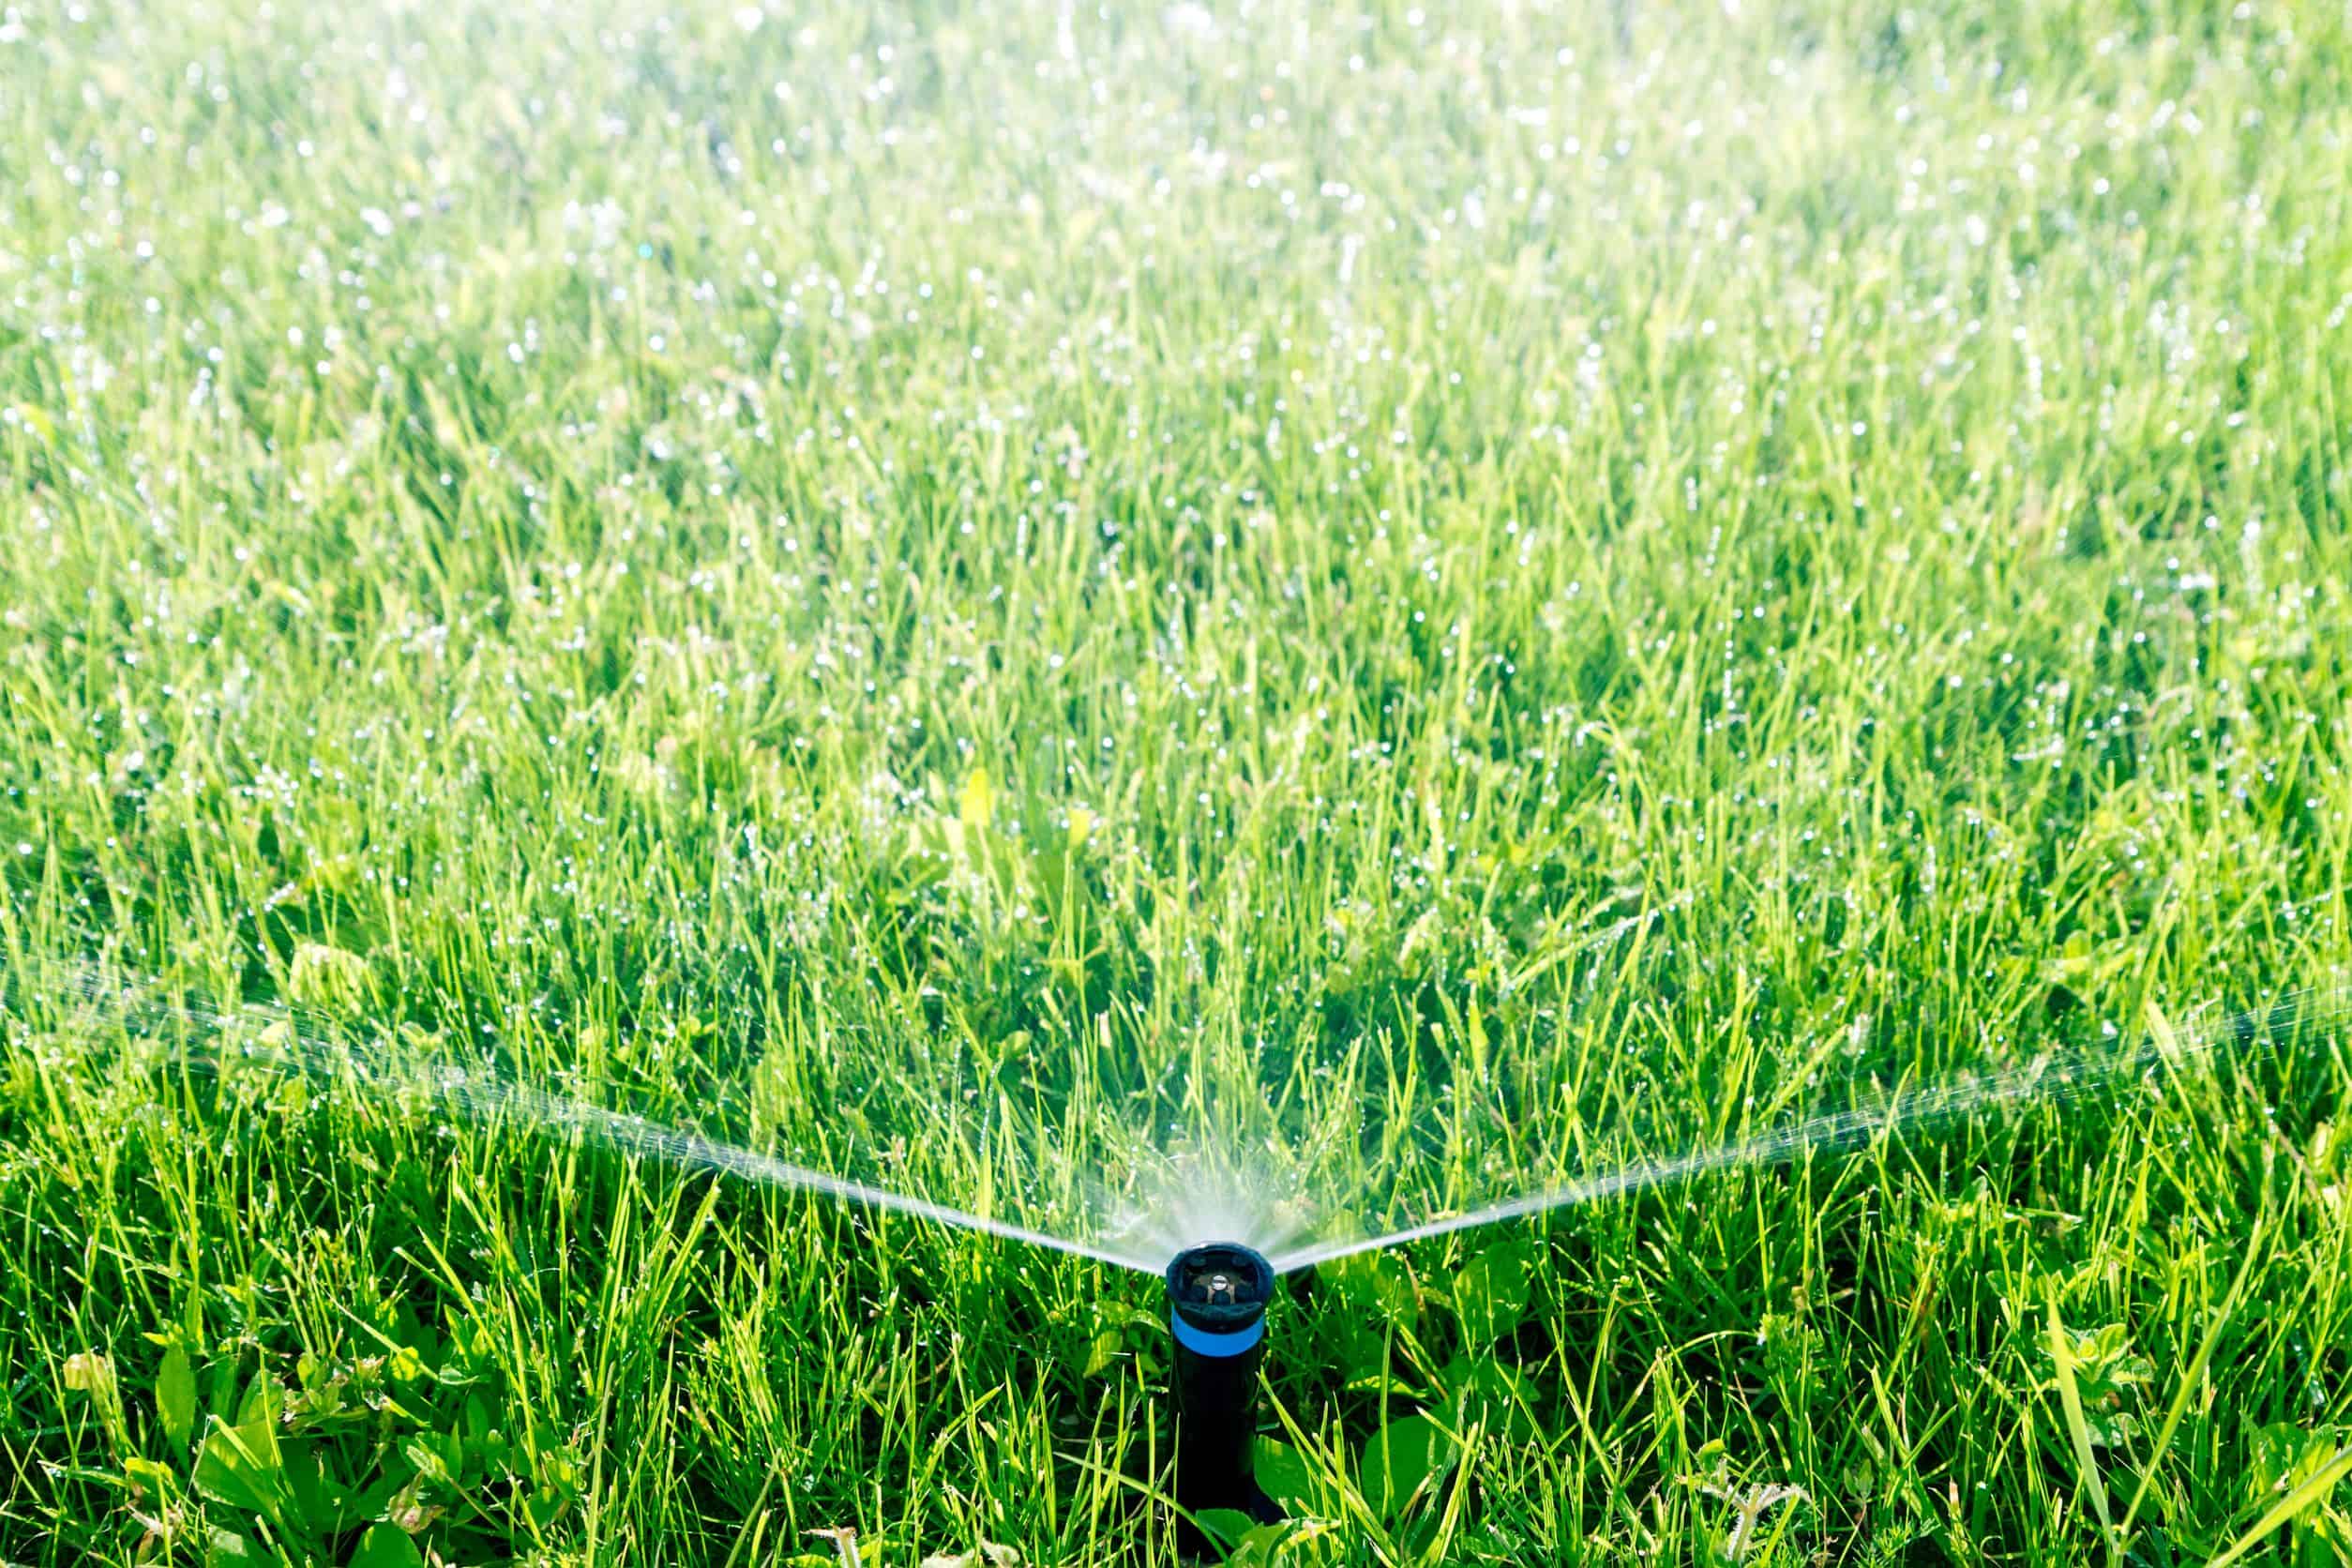 How Does Winter Lawn Care Work in Texas? The Grass